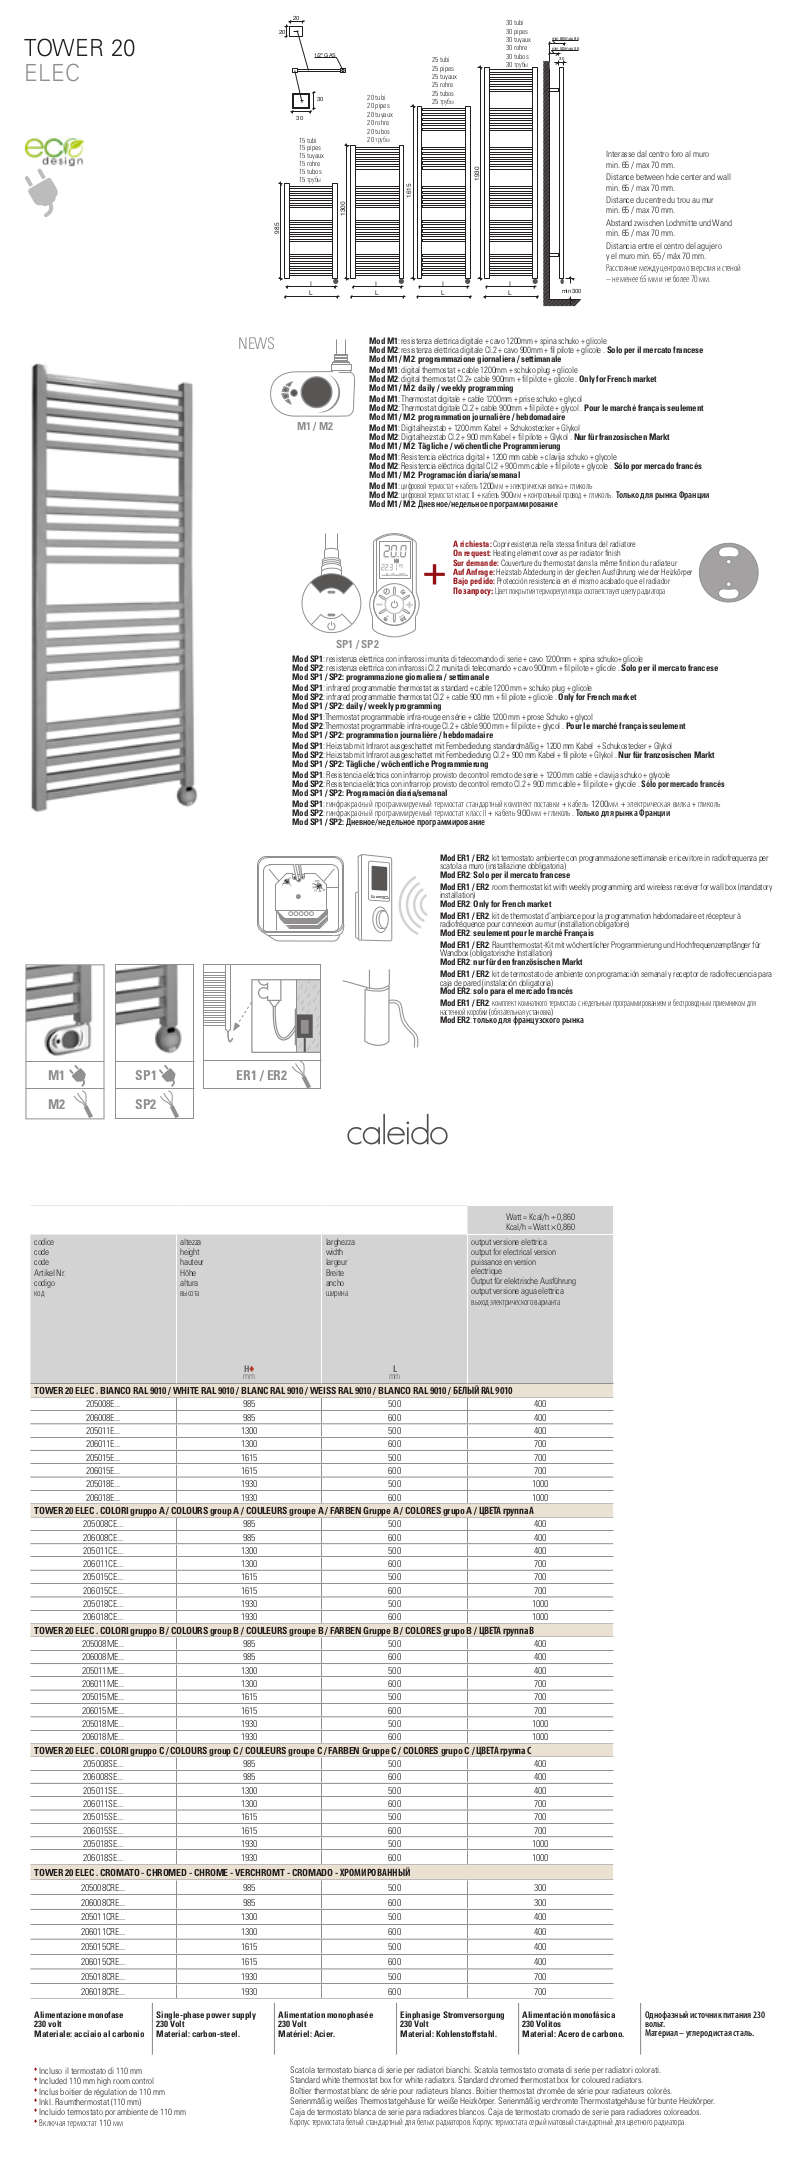 technical sheet electric Heated Towel Rail tower 20 caleido